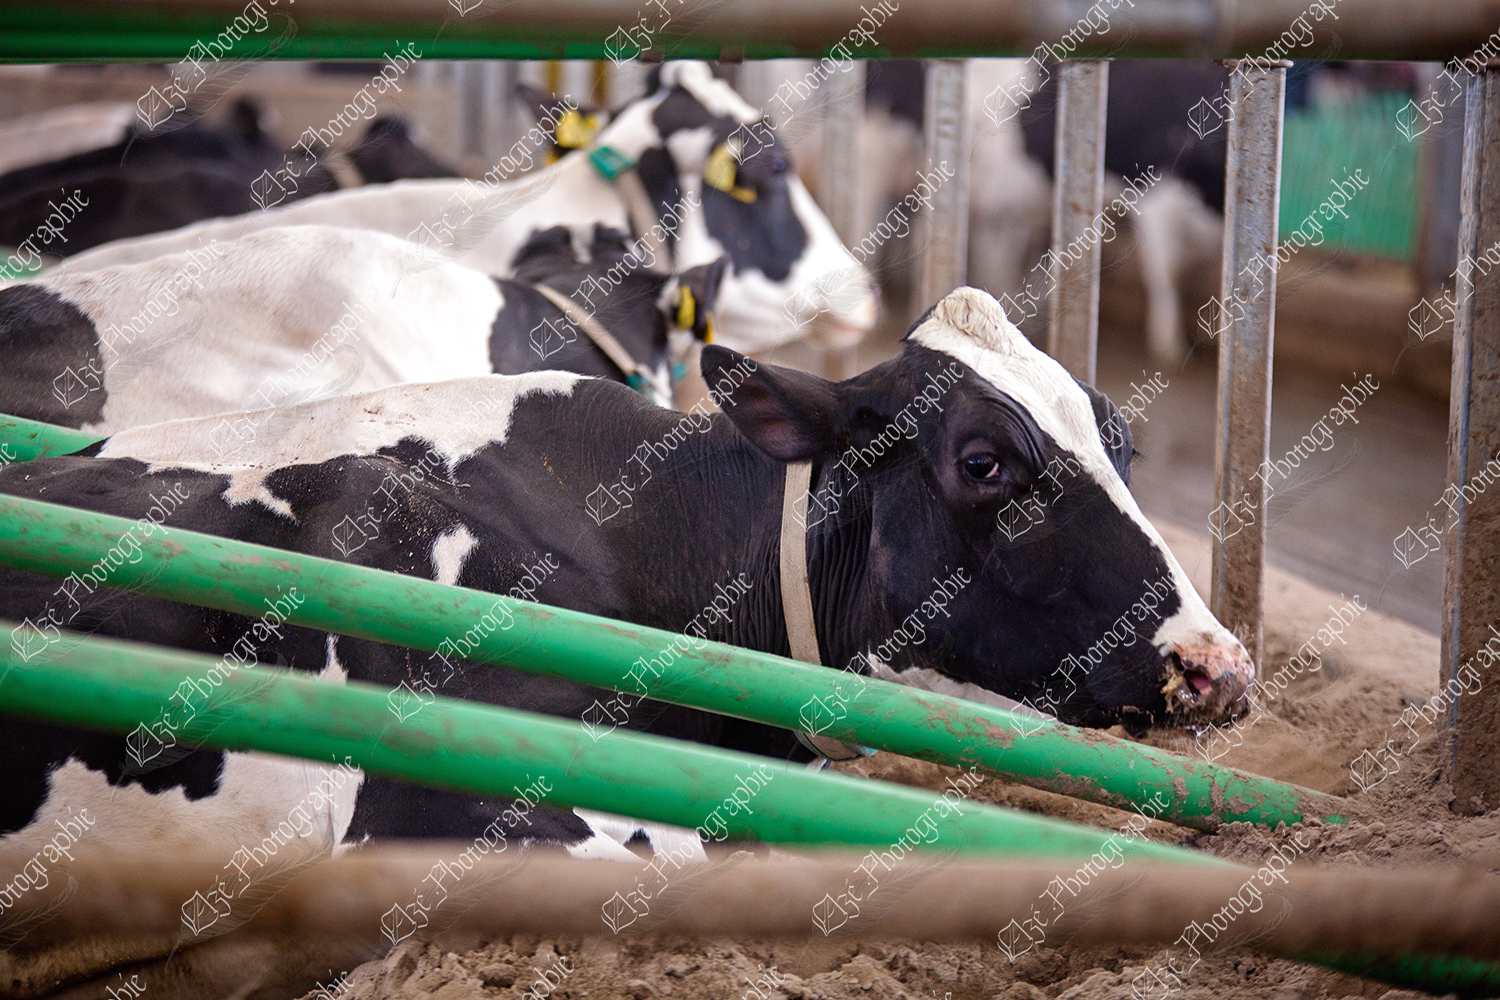 elze_photo_6037_repos_logette_vache_free_stall_sand_414060197